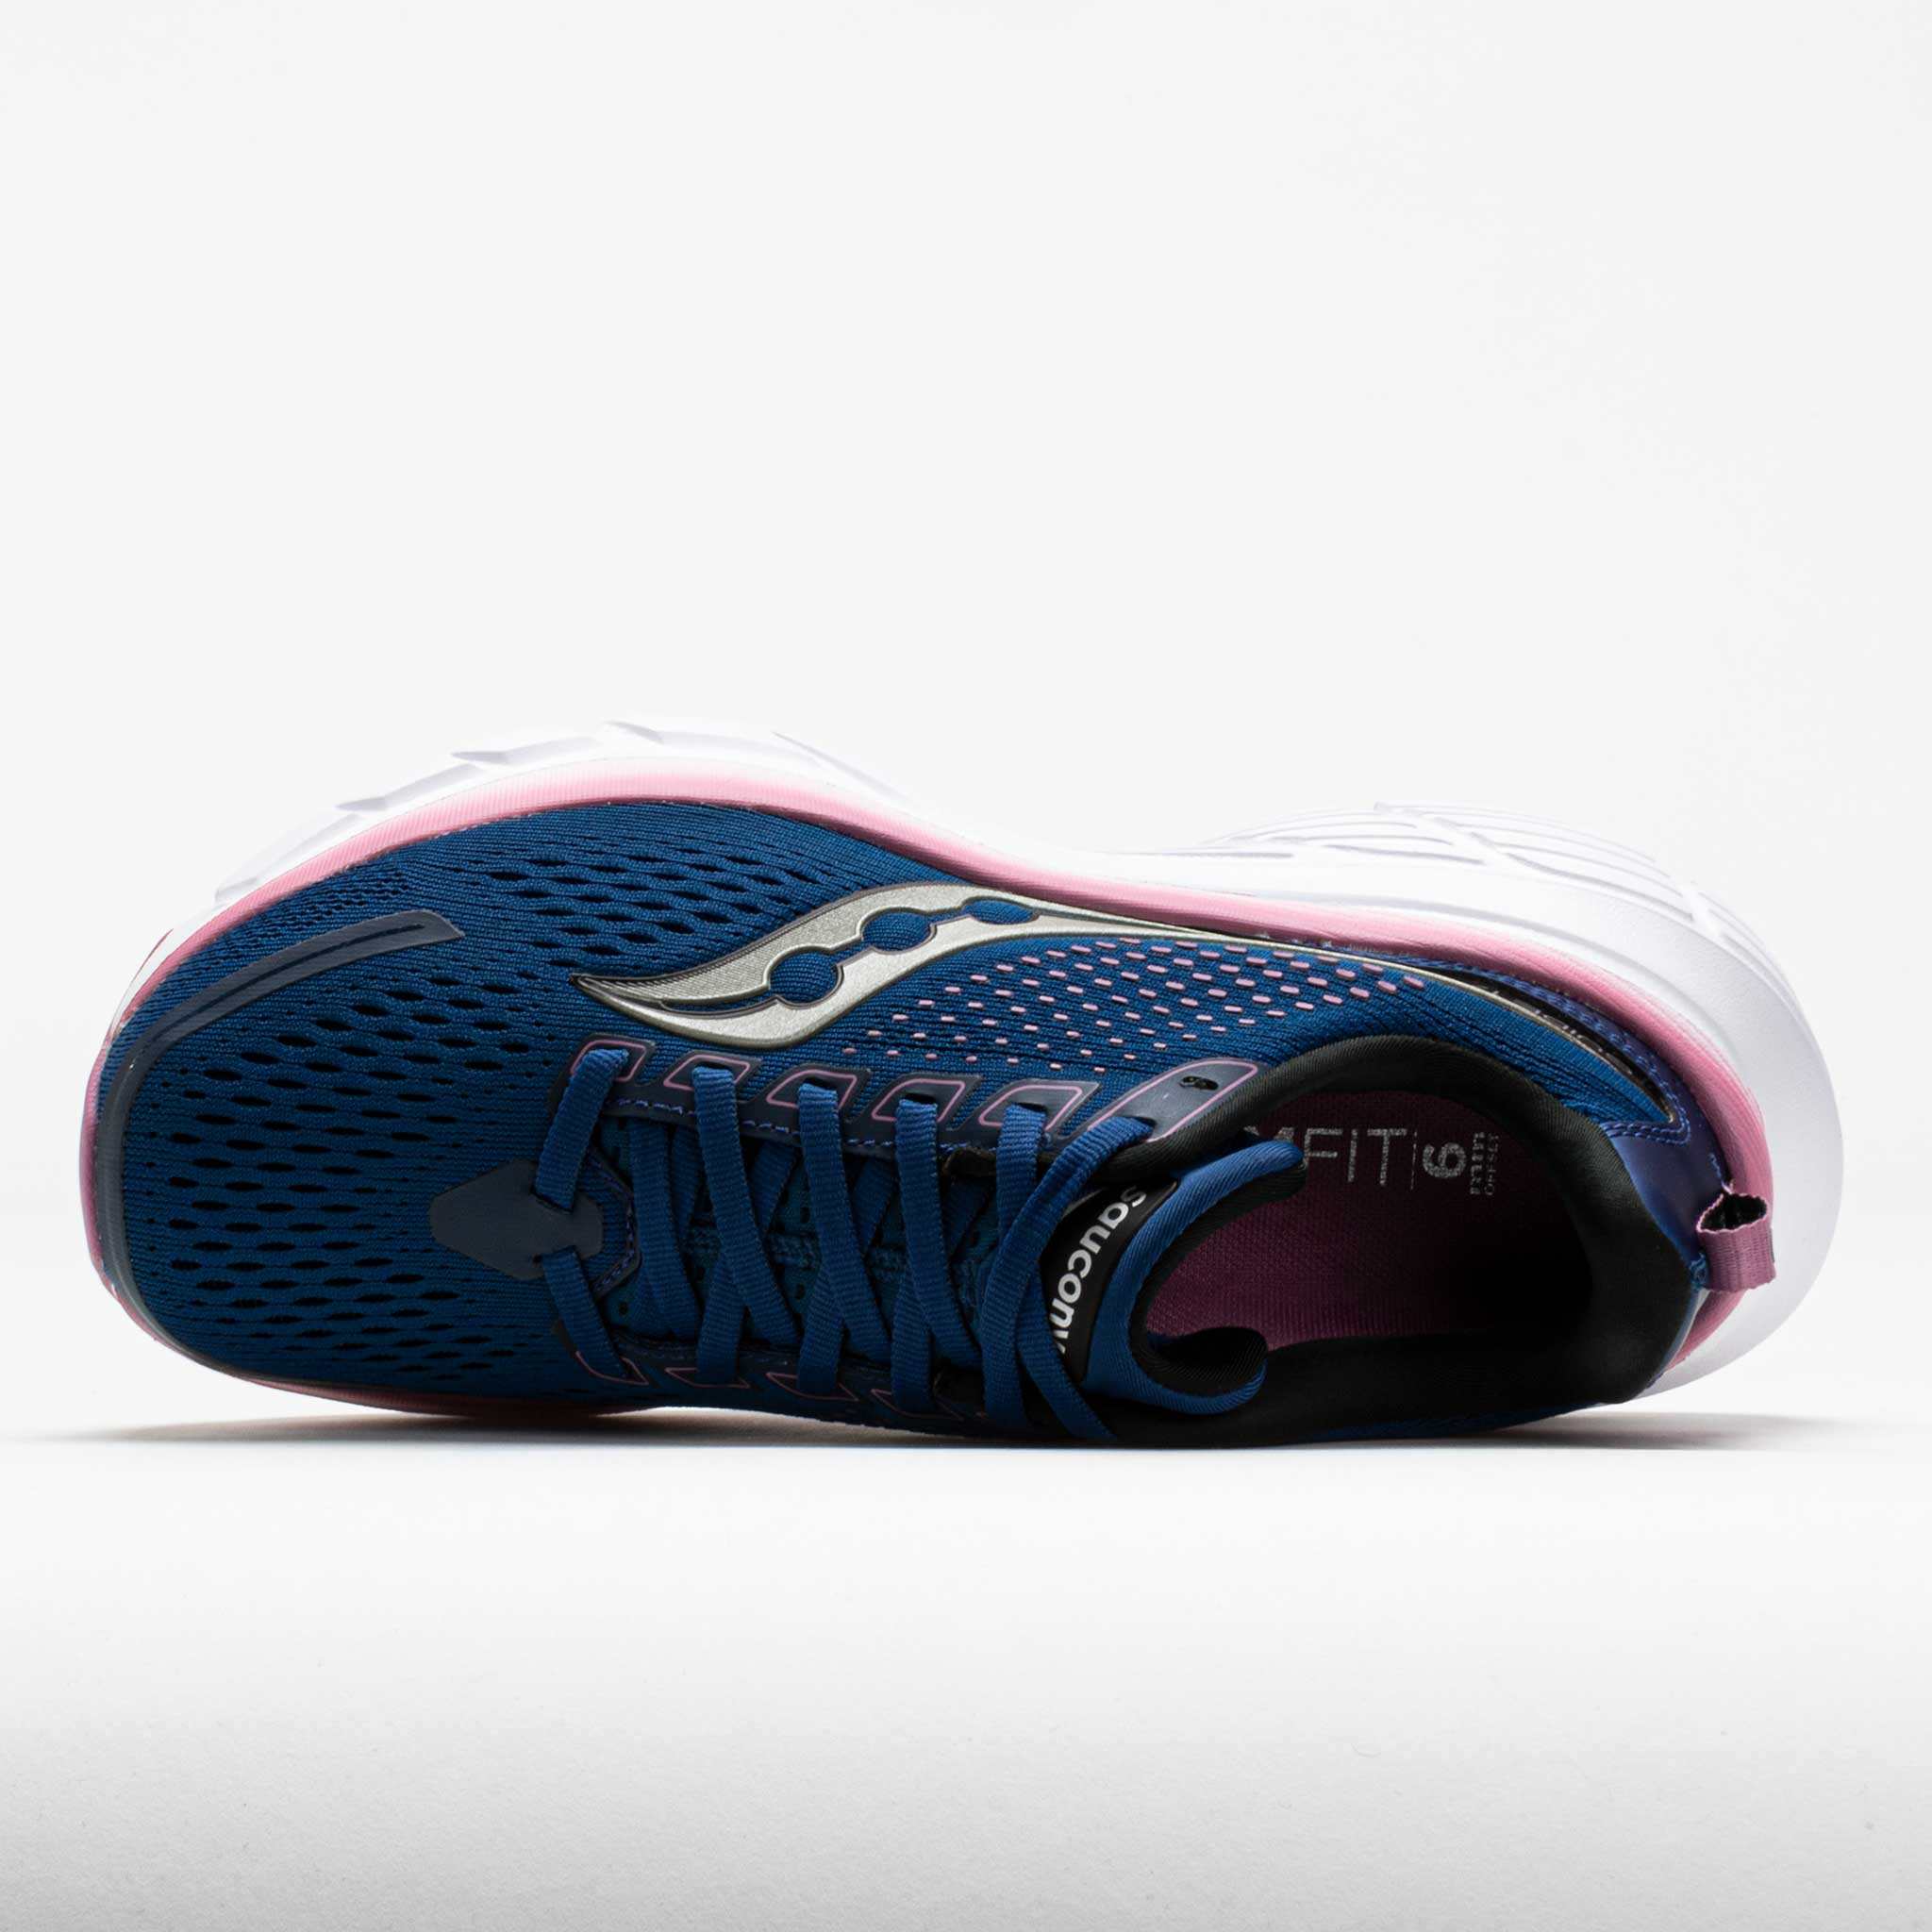 Saucony Guide 17 Women's Navy/Orchid